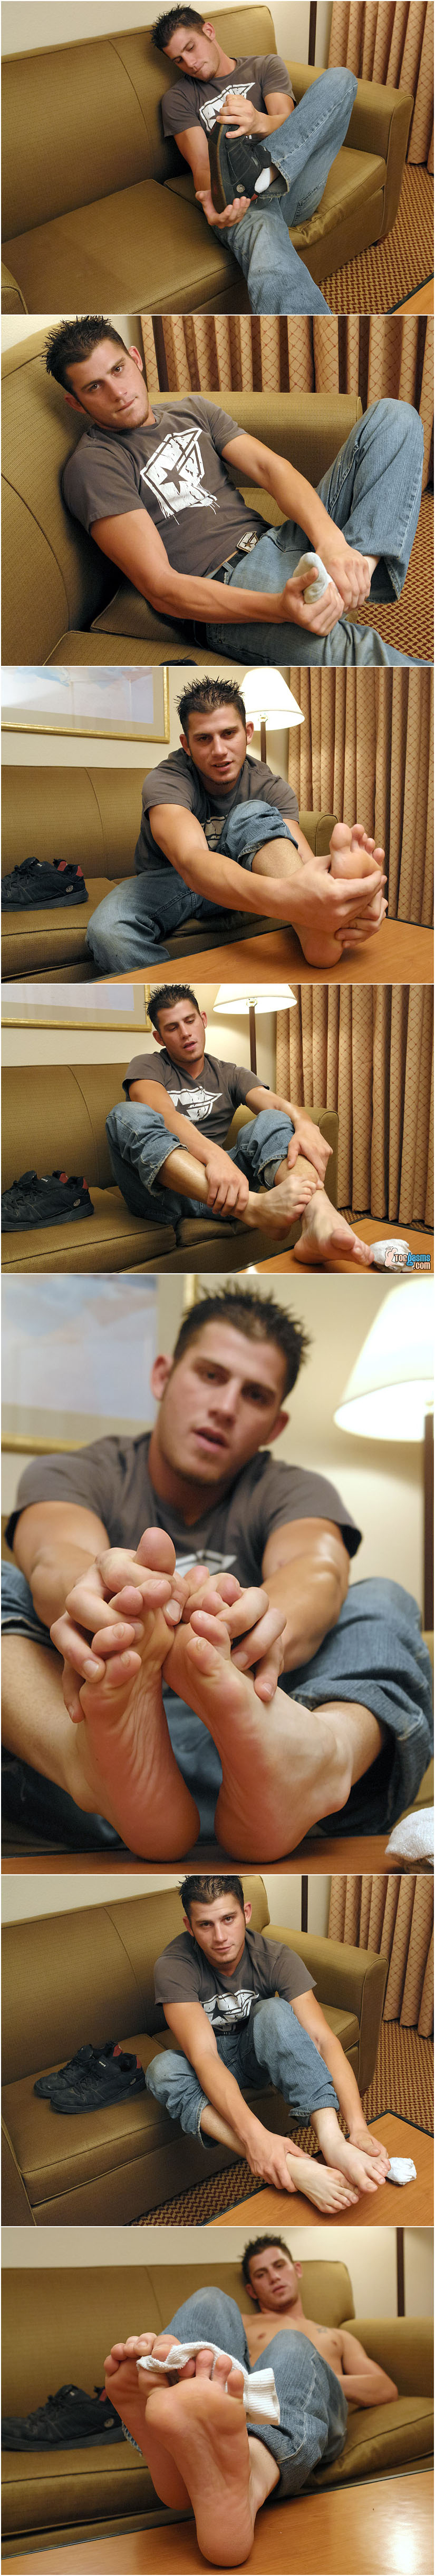 straight guy shows his bare feet4